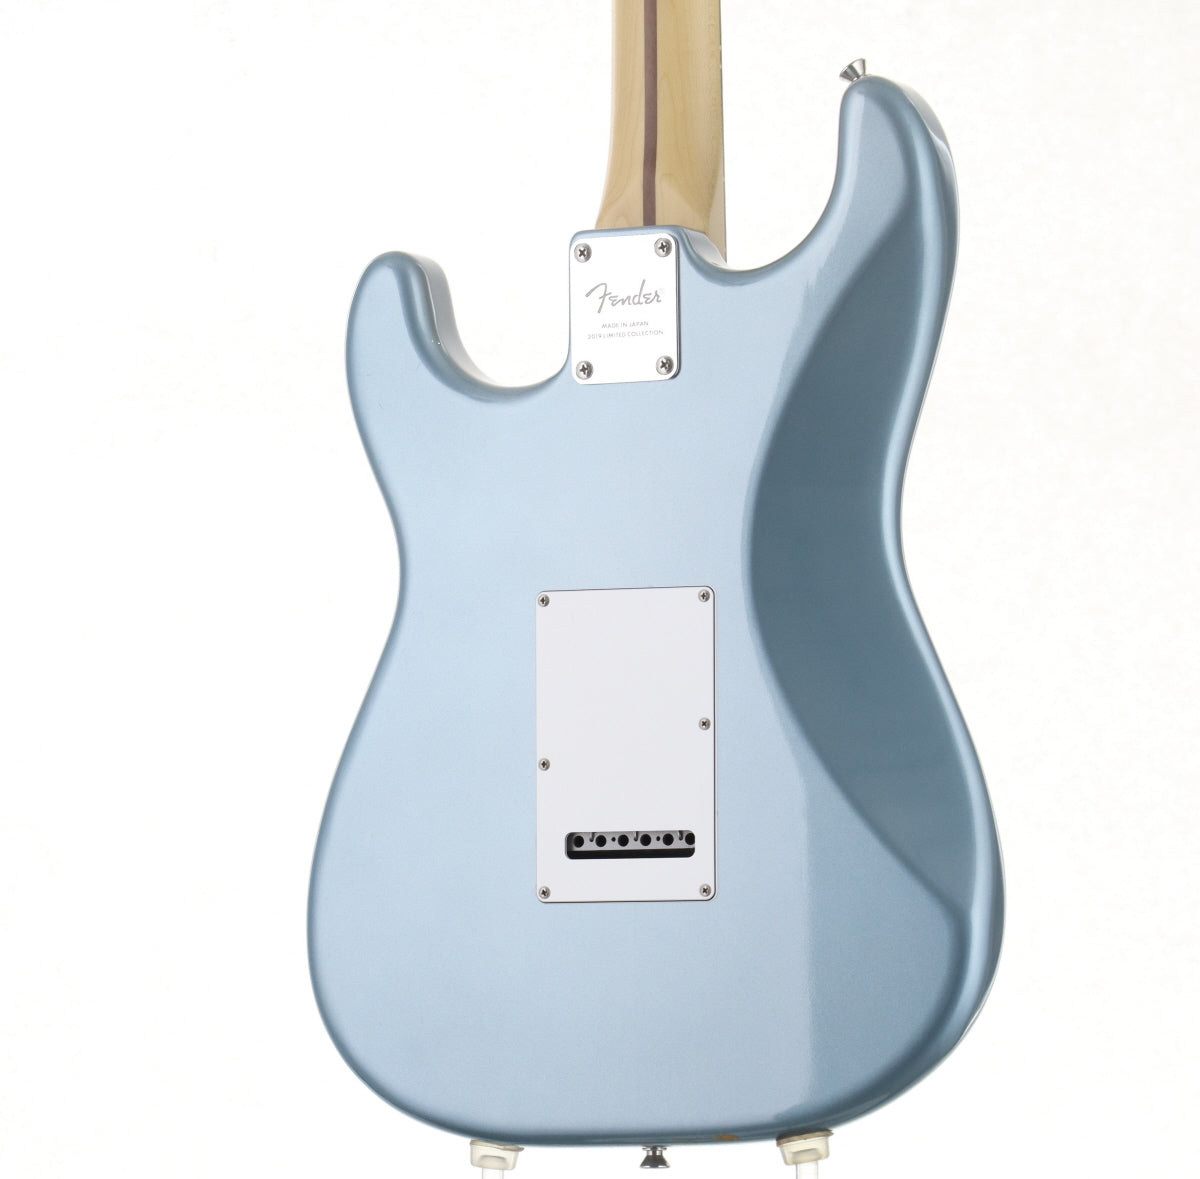 [SN JD19003458] USED Fender / Made in Japan 2019 Limited Collection Stratocaster Ice Blue Metallic [03]